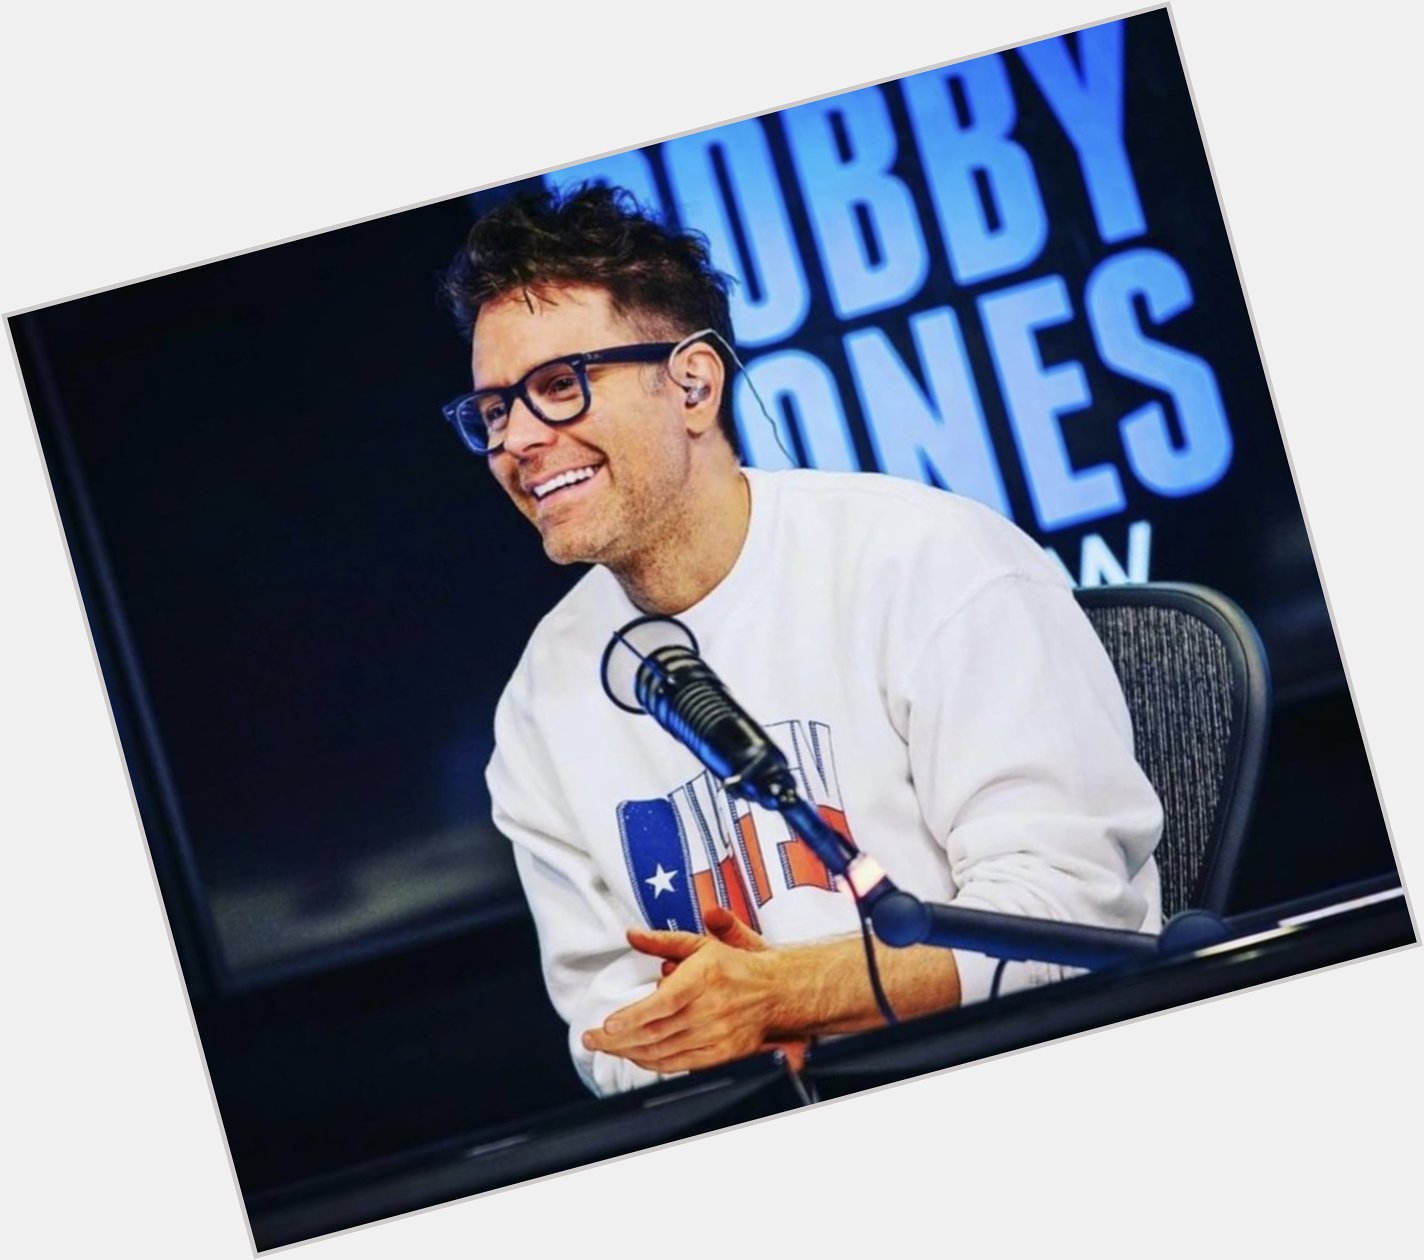  Happy Birthday Bobby Bones Thanks putting smiles on our faces each weekday morning!  Today is his big 40!! 